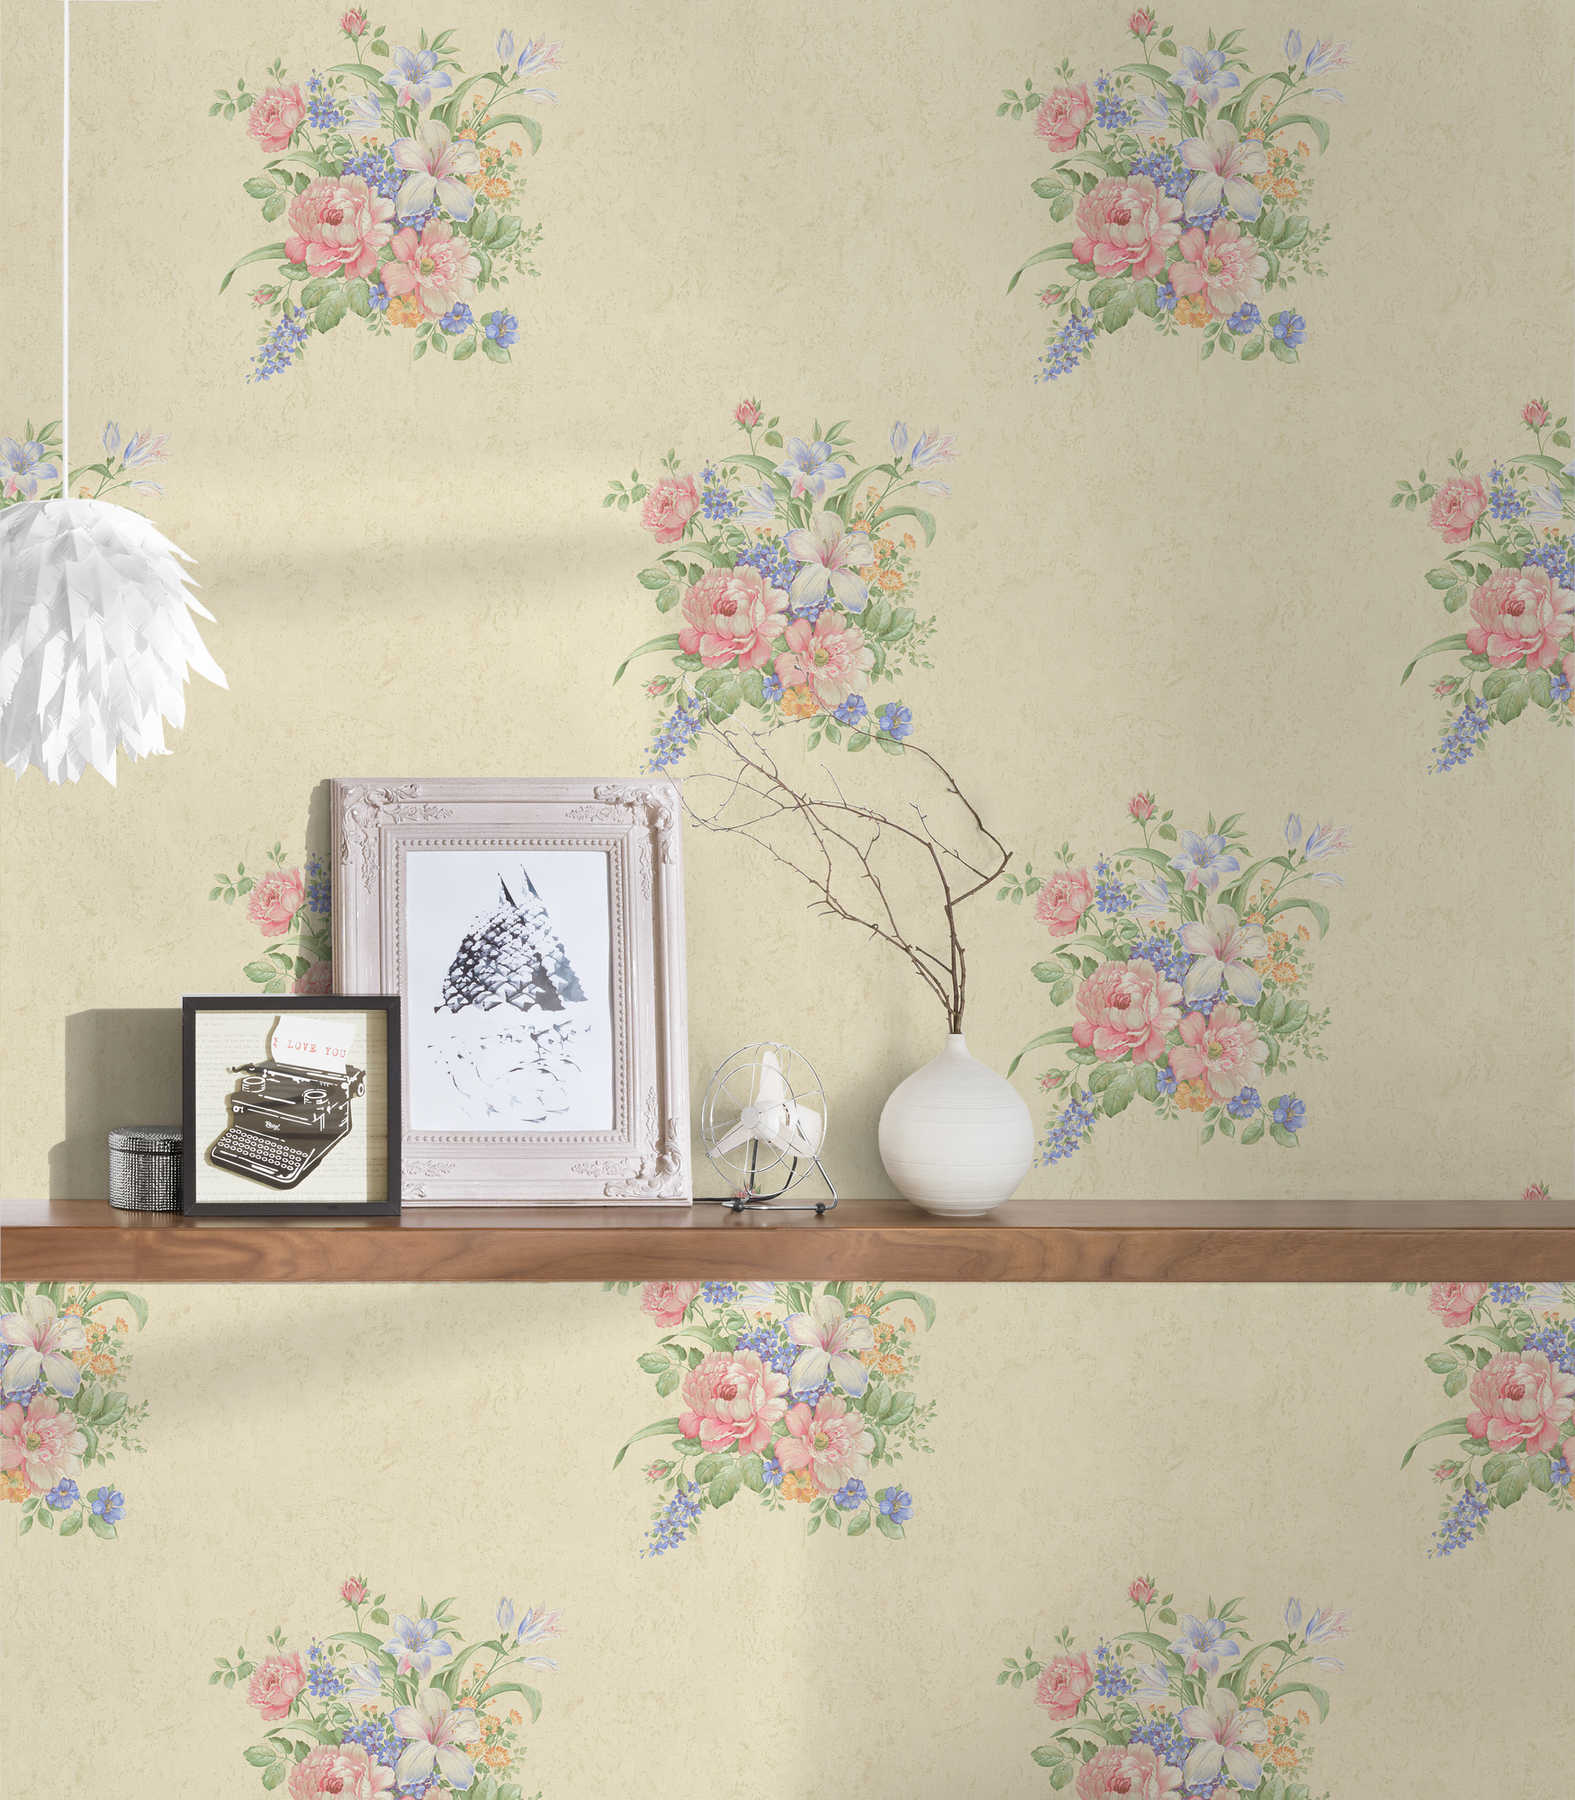             Non-woven wallpaper floral ornaments & textured pattern - cream, green, pink
        